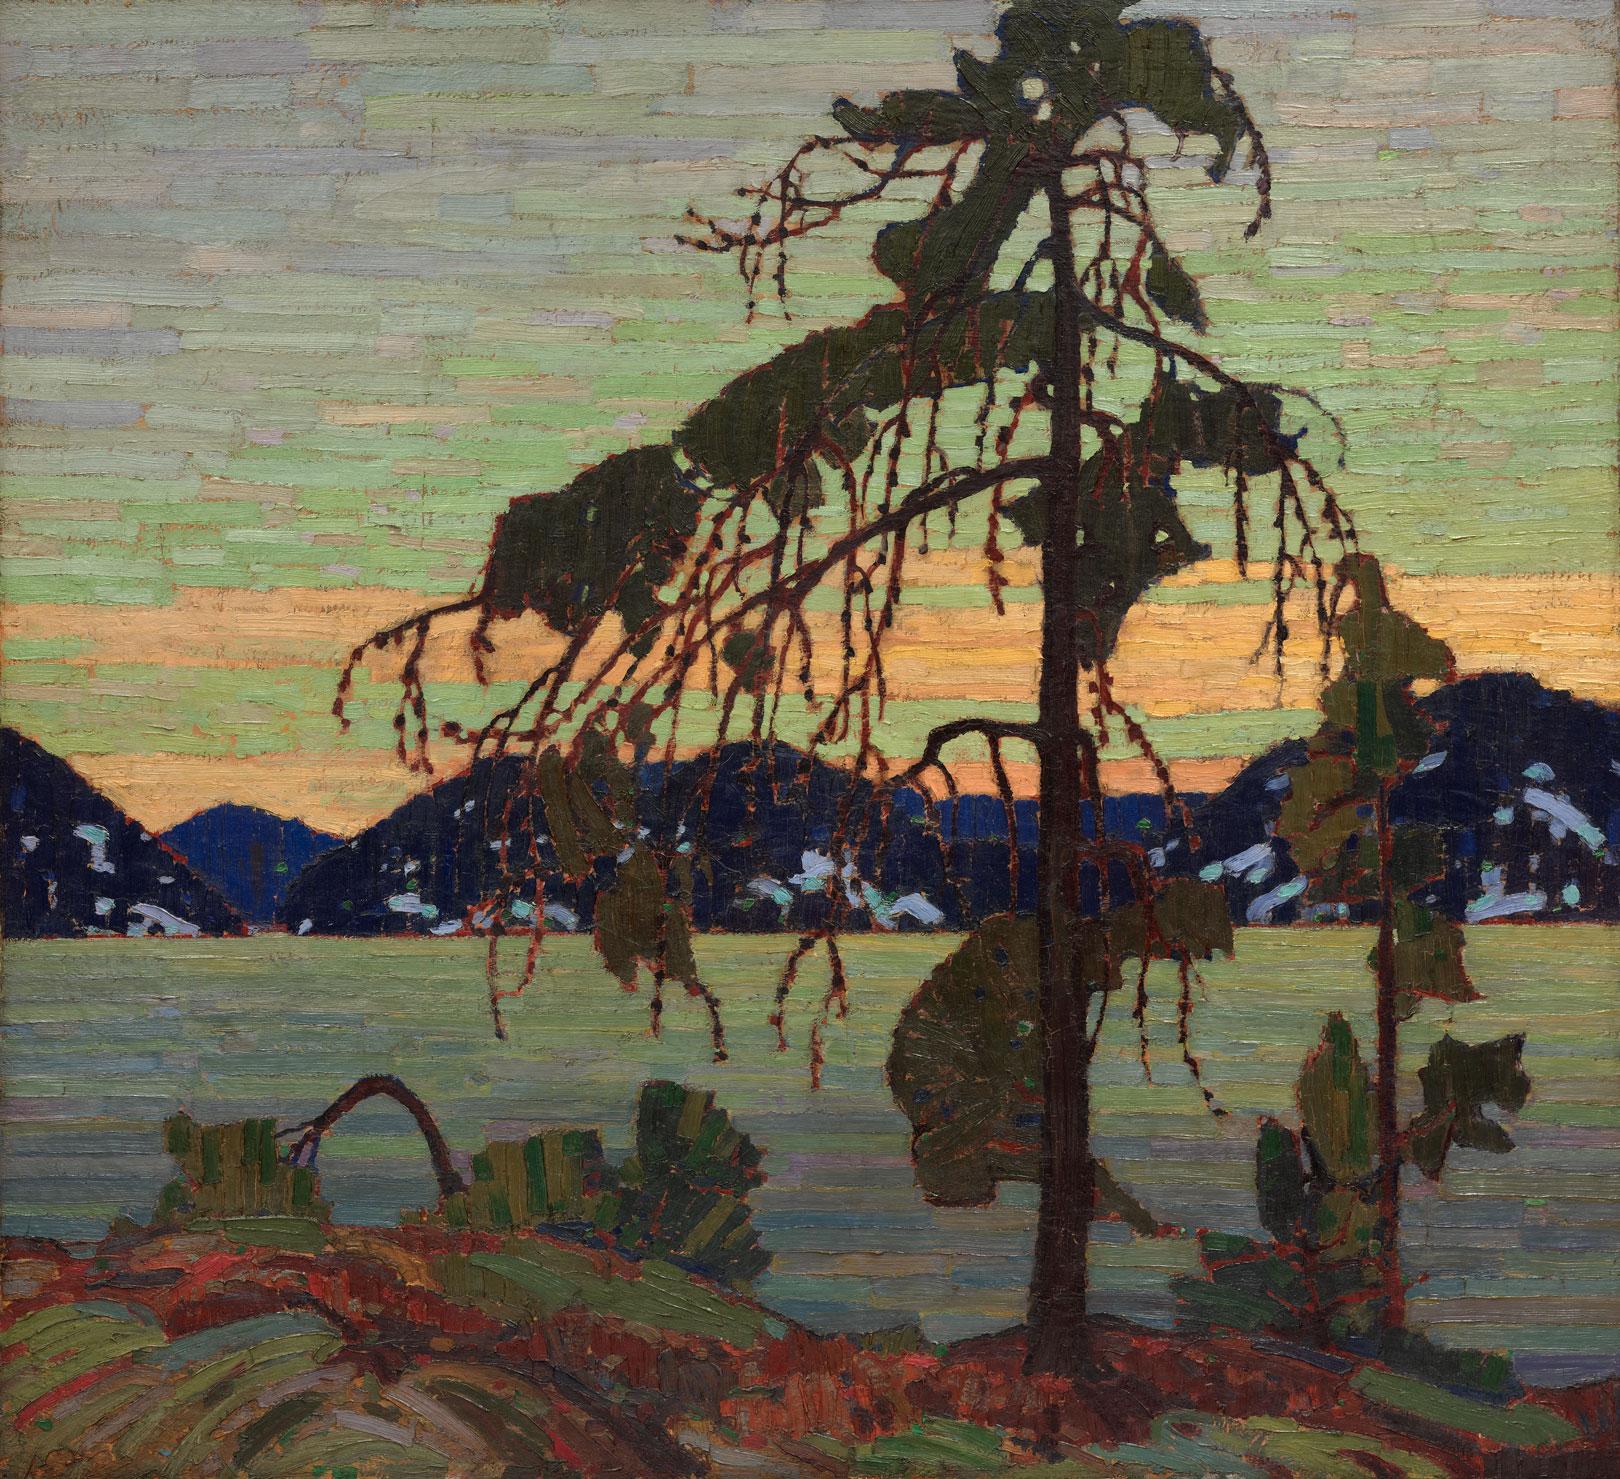 McMichael Canadian Art Collection Announces Tom Thomson: North Star